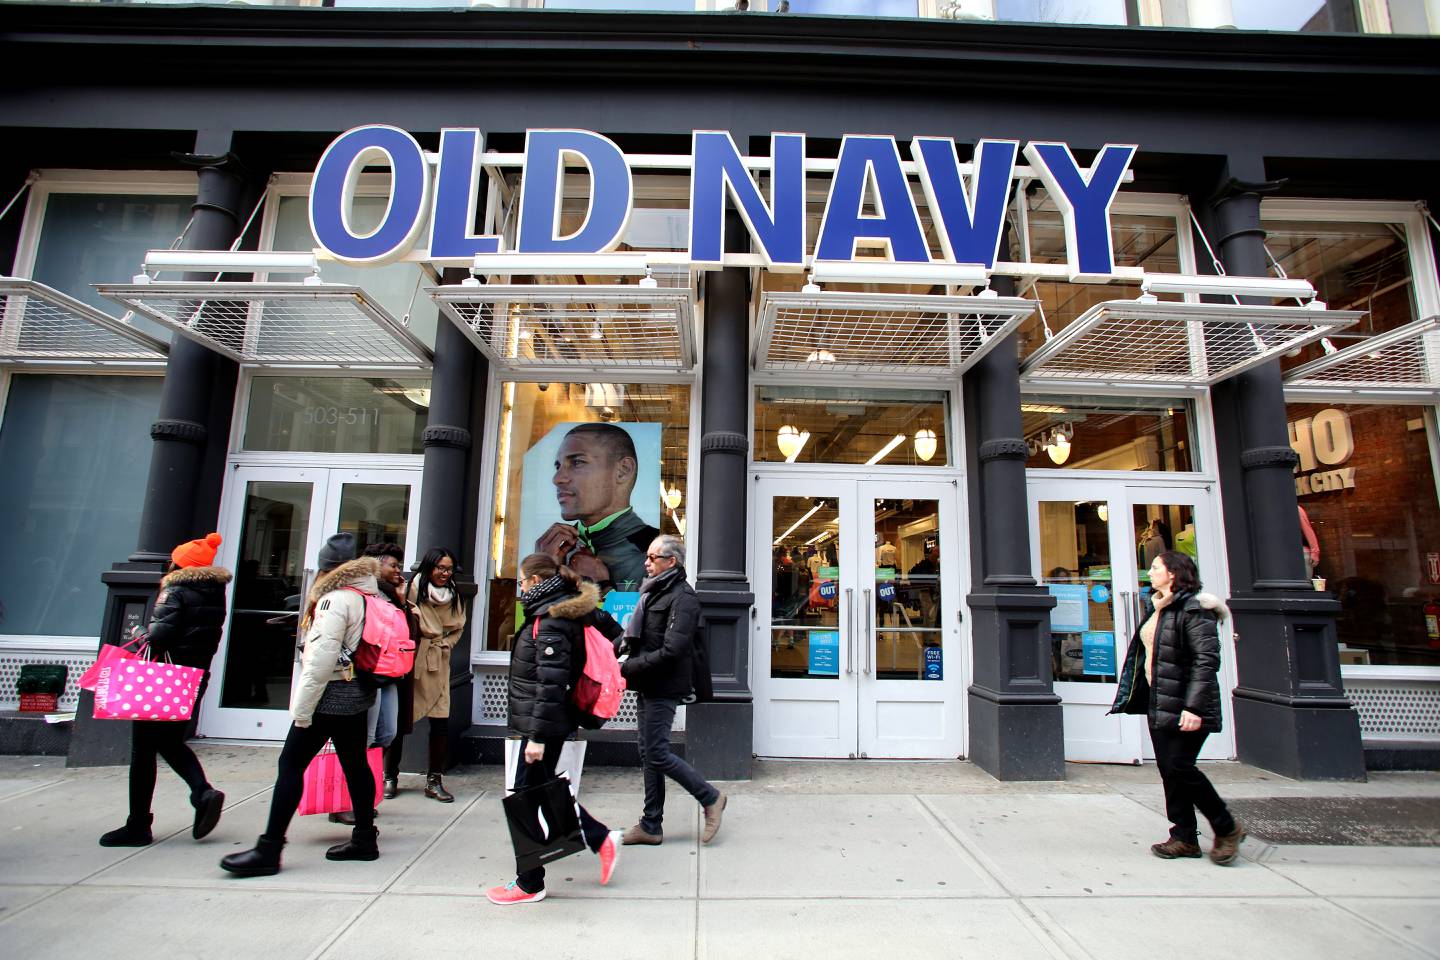 An Old Navy retail location.